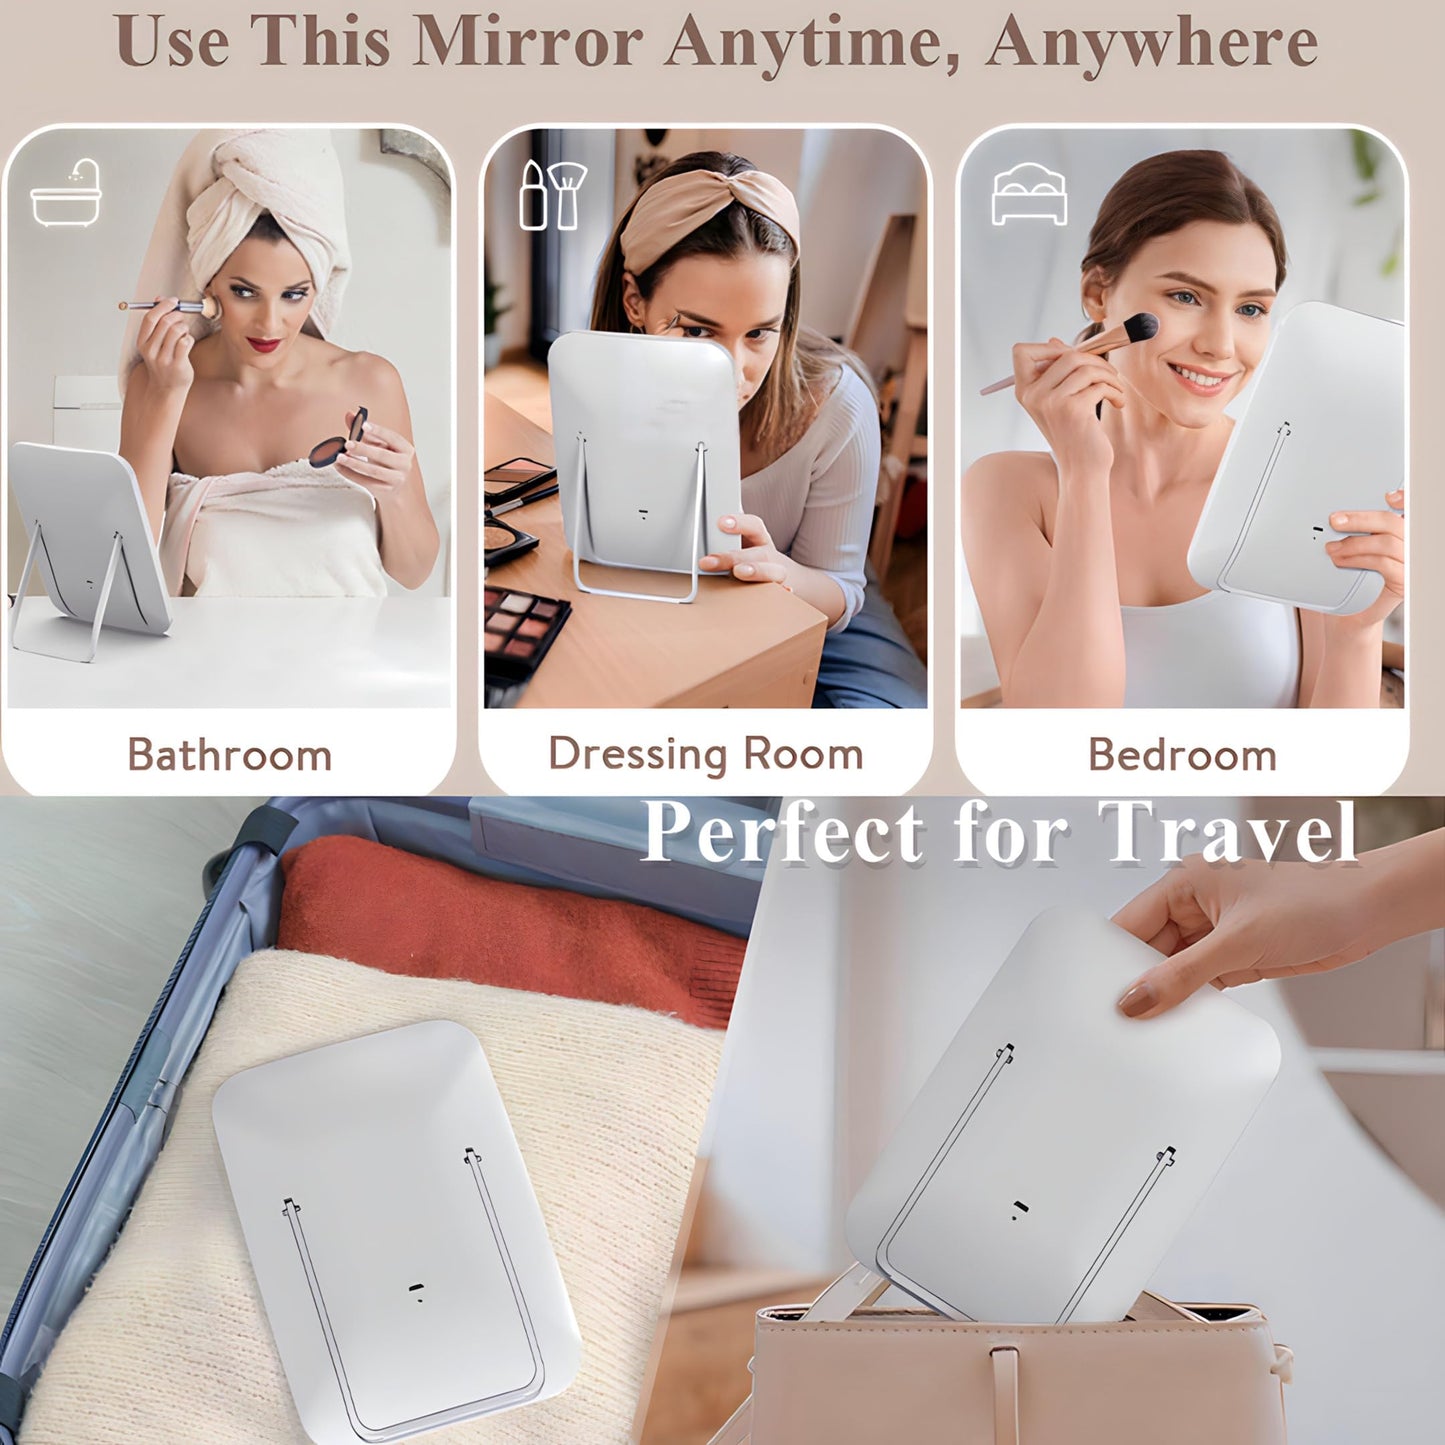 Eddies Gallery LED Makeup Mirror with light screen, 3 Lighted travel mirror Colors, and USB Rechargeable with 68 LED Lights. Hollywood mirror, Makeup Mirror Gifts for Girl/Women. (ABS)